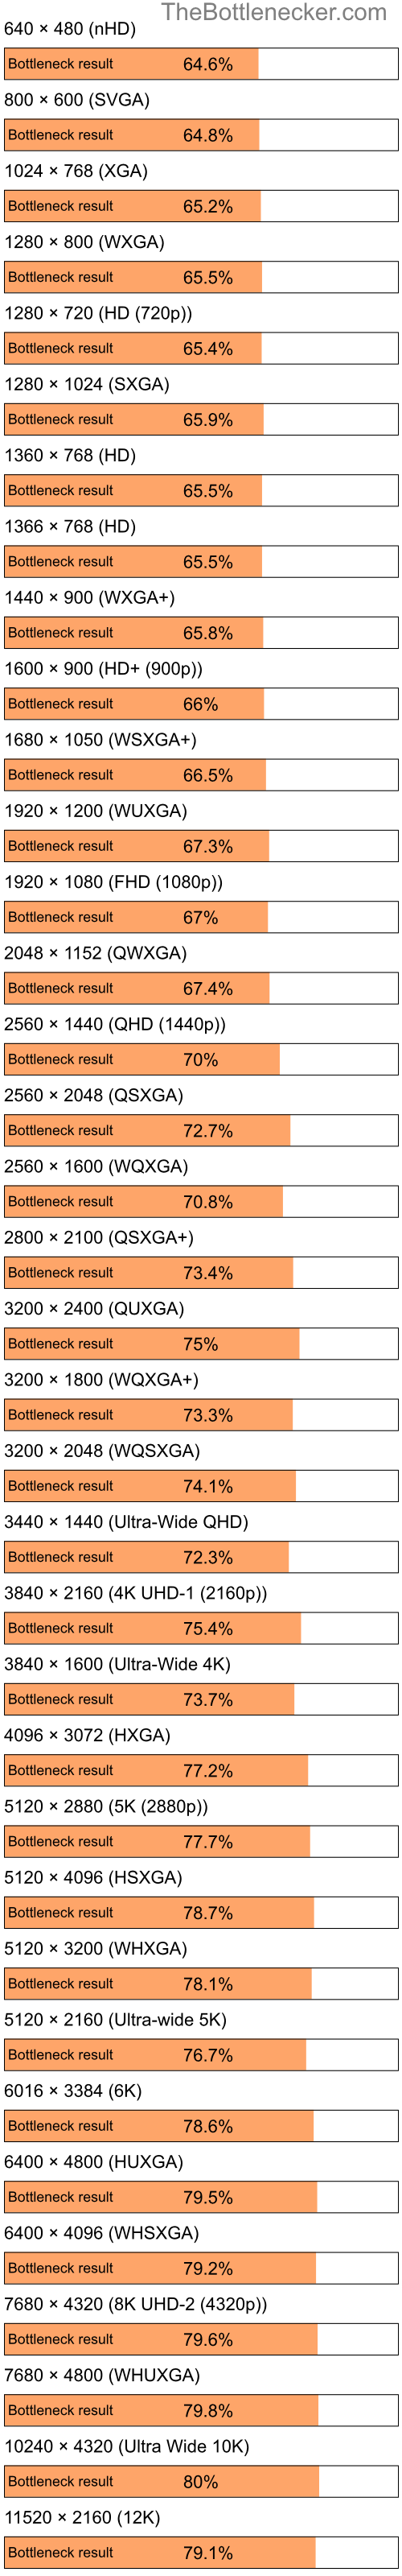 Bottleneck results by resolution for Intel Atom Z520 and NVIDIA GeForce 9300M GS in7 Days to Die